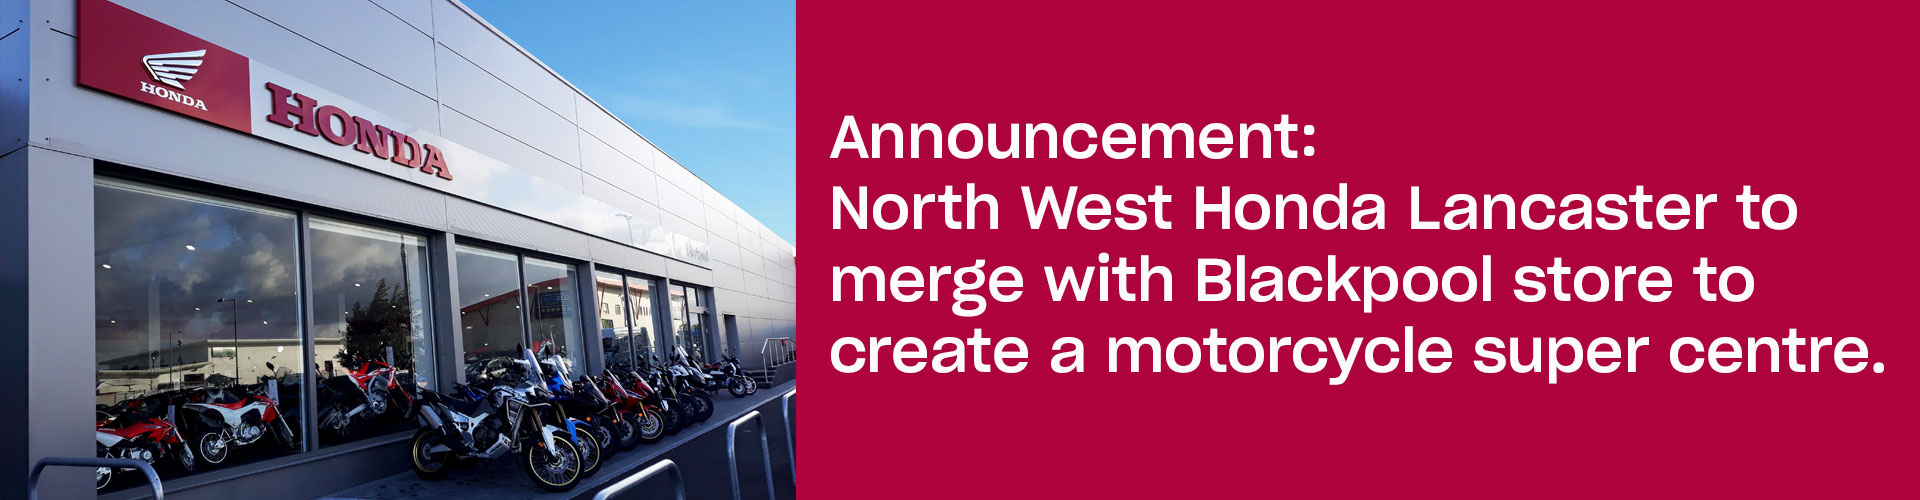 North West Honda Lancaster to merge with Blackpool store